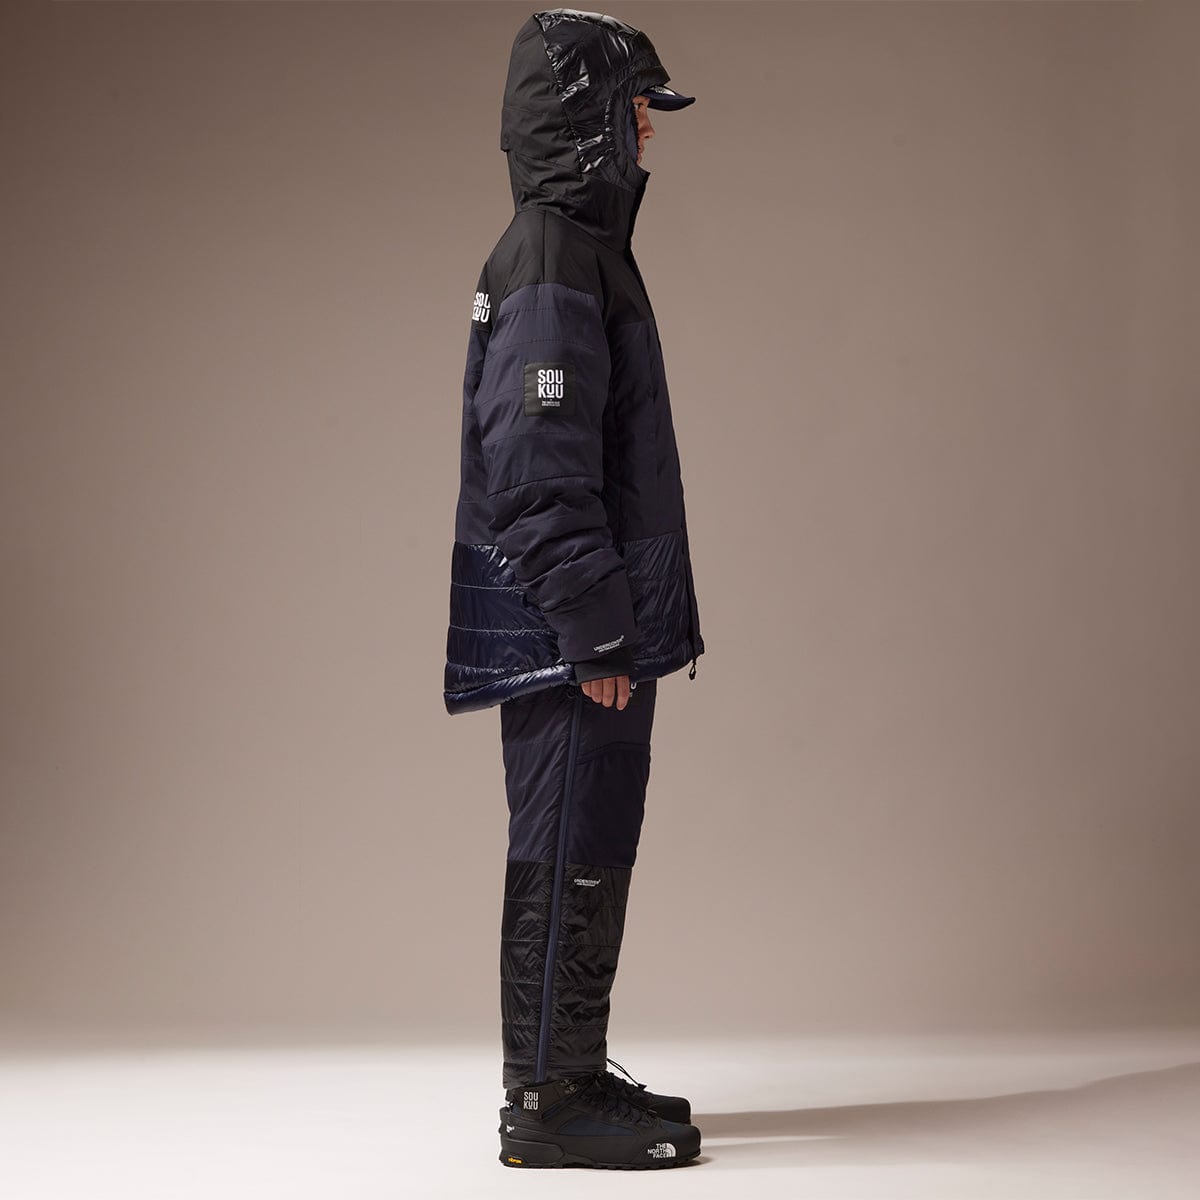 SOUKUU BY THE NORTH FACE X UNDERCOVER PROJECT 50-50 MOUNTAIN JACKET